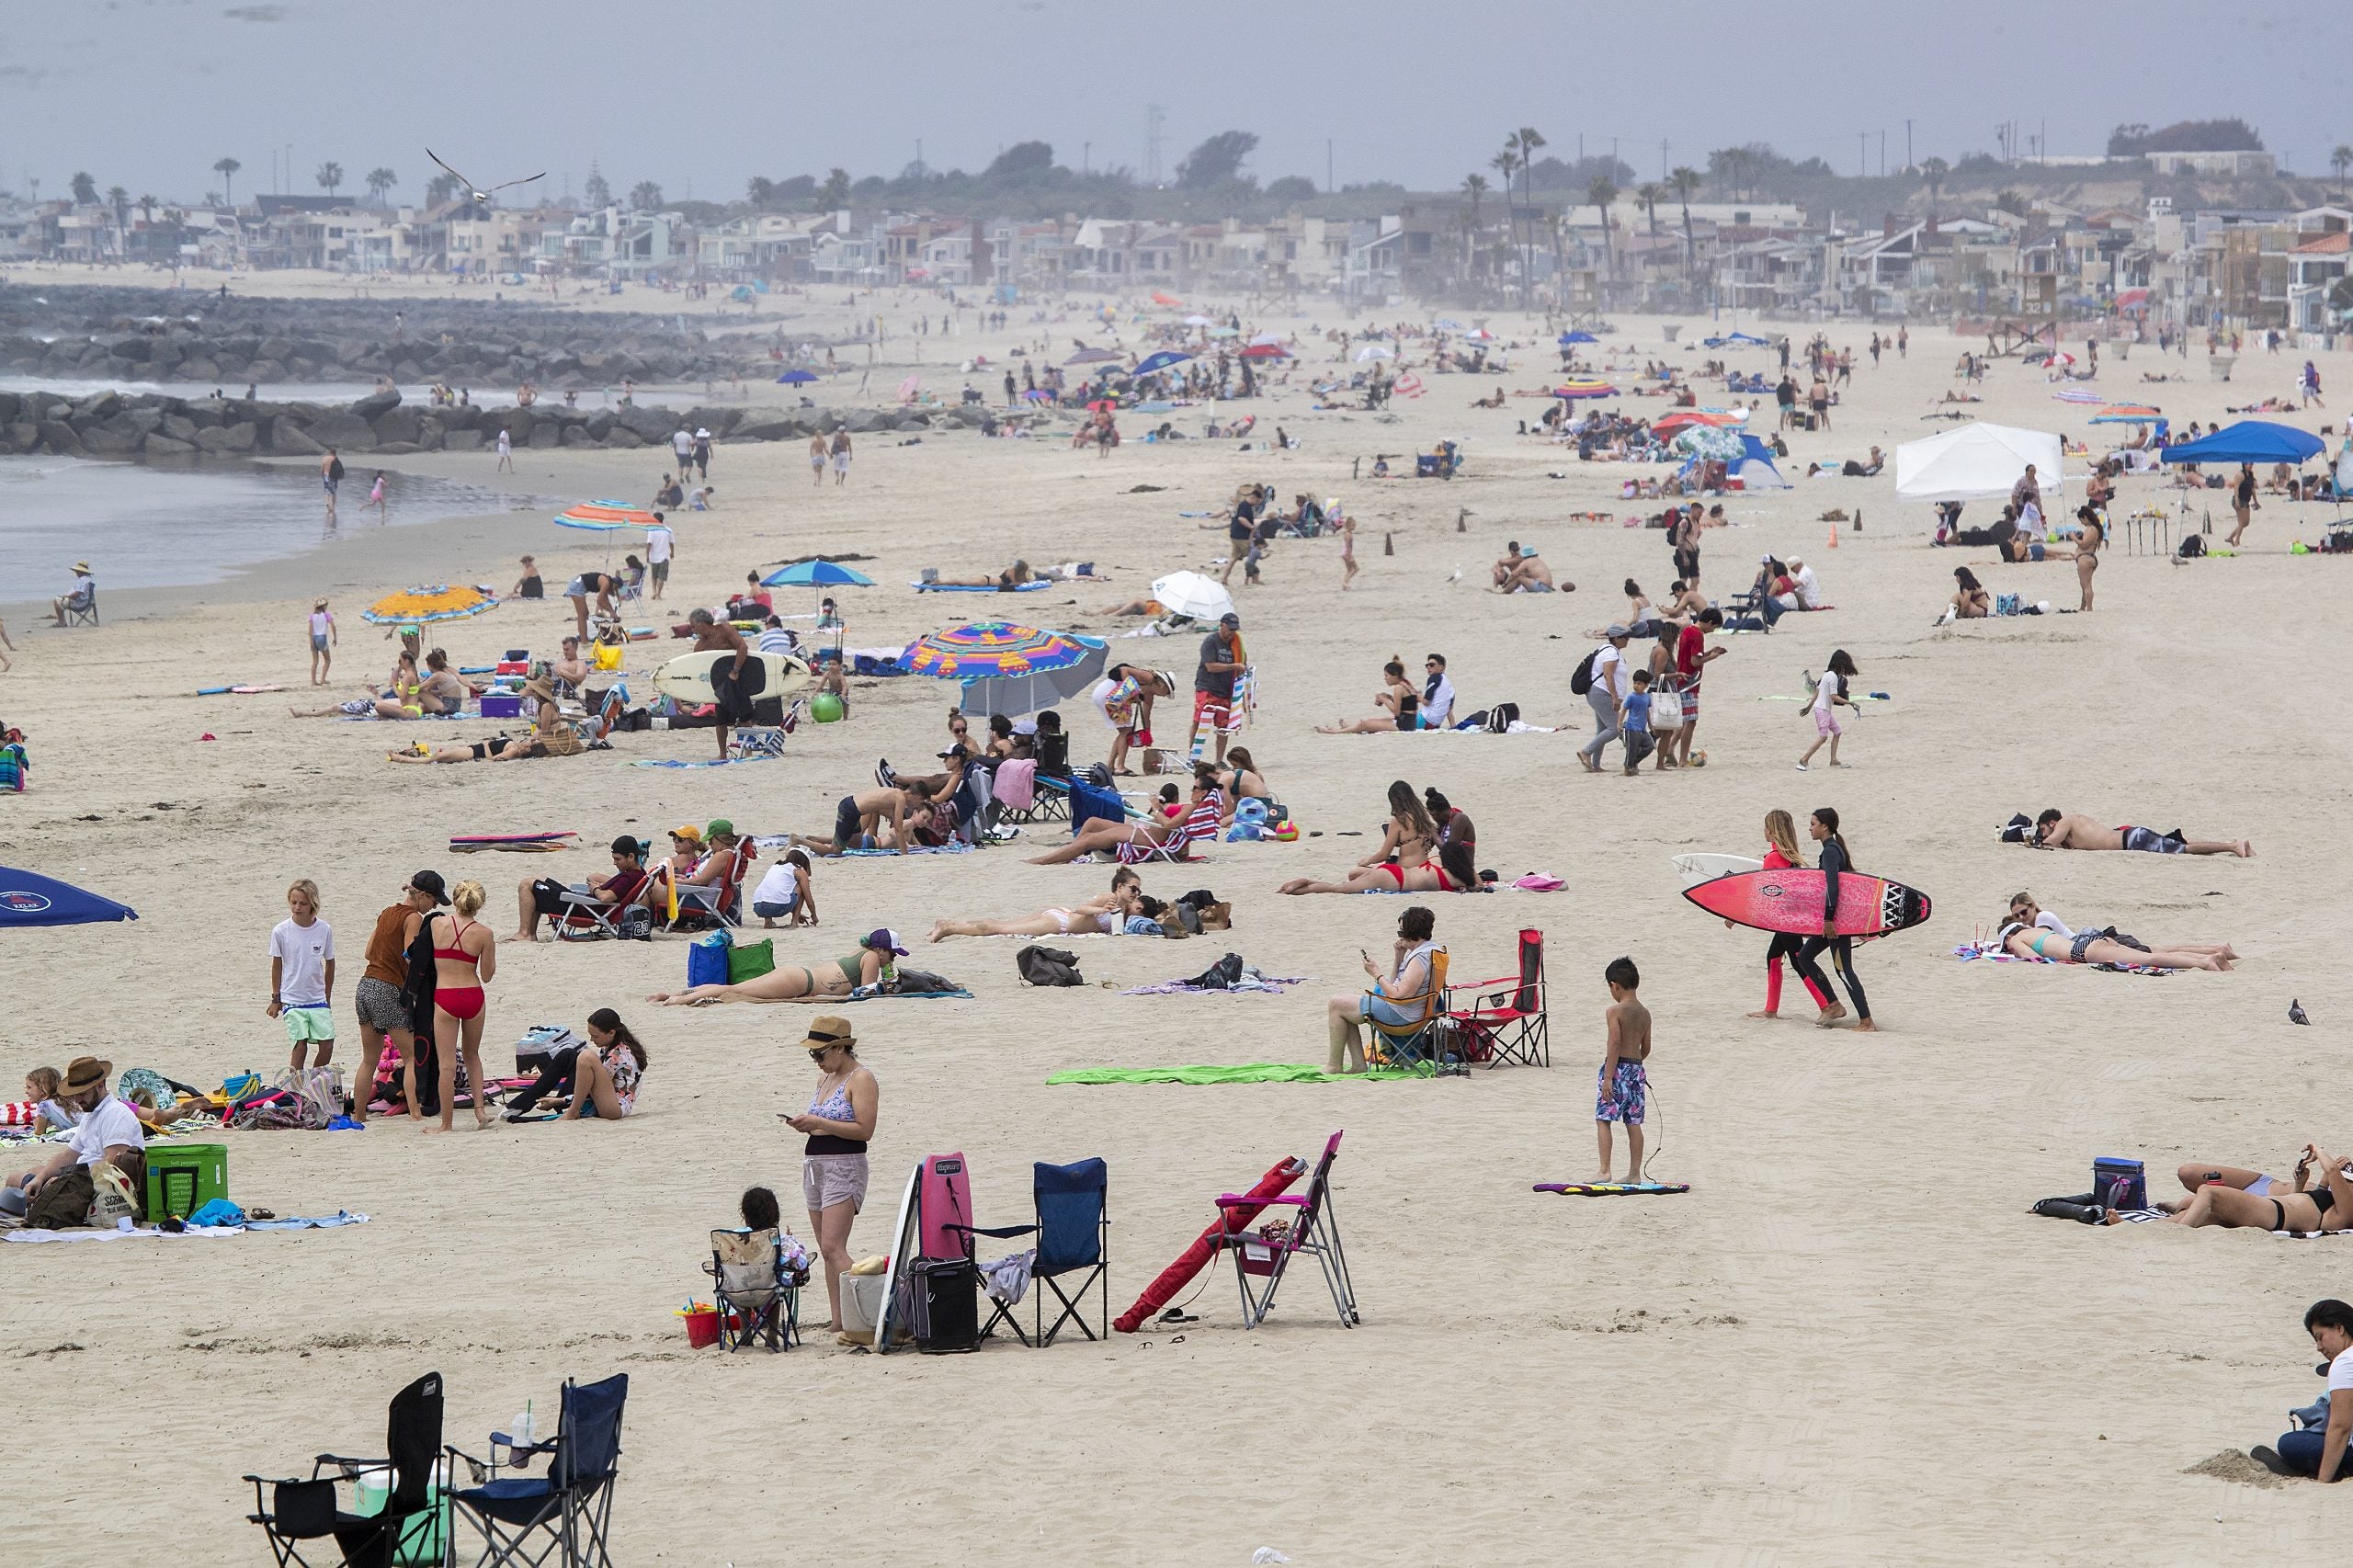 Two Orange County, Calif. Cities Move To Challenge Gov.'s Order Closing Beaches